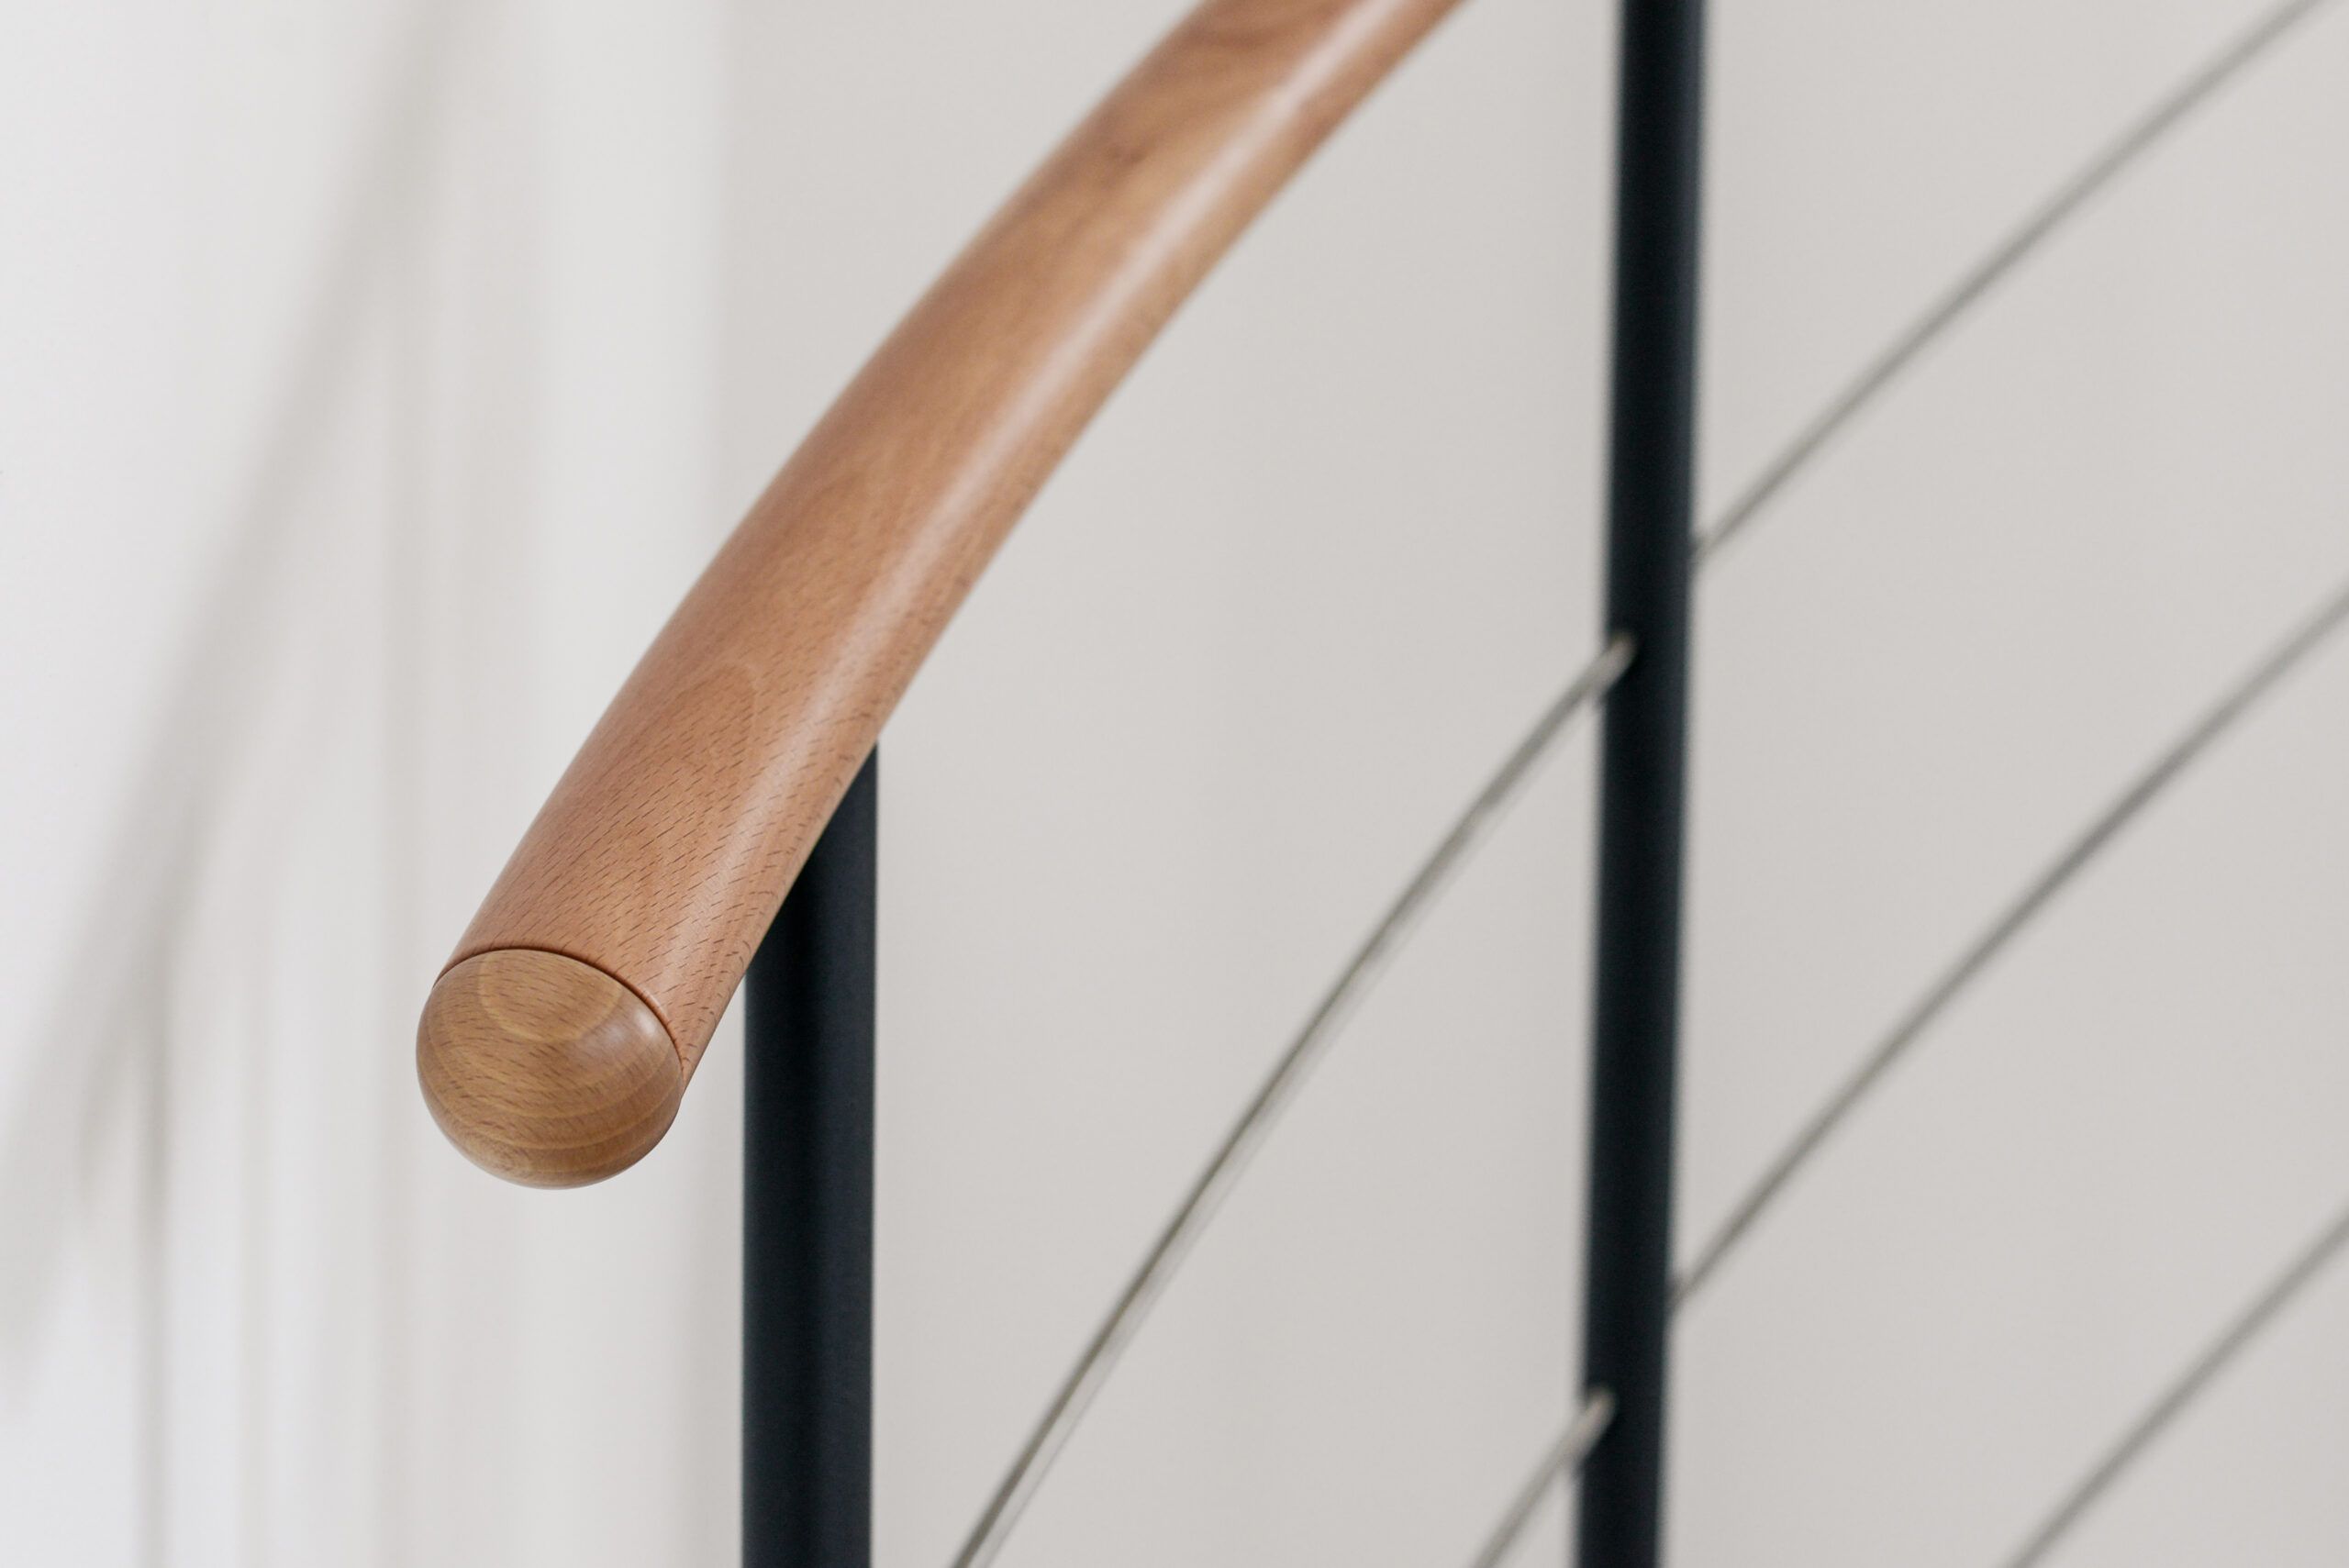 Handrail made of wood